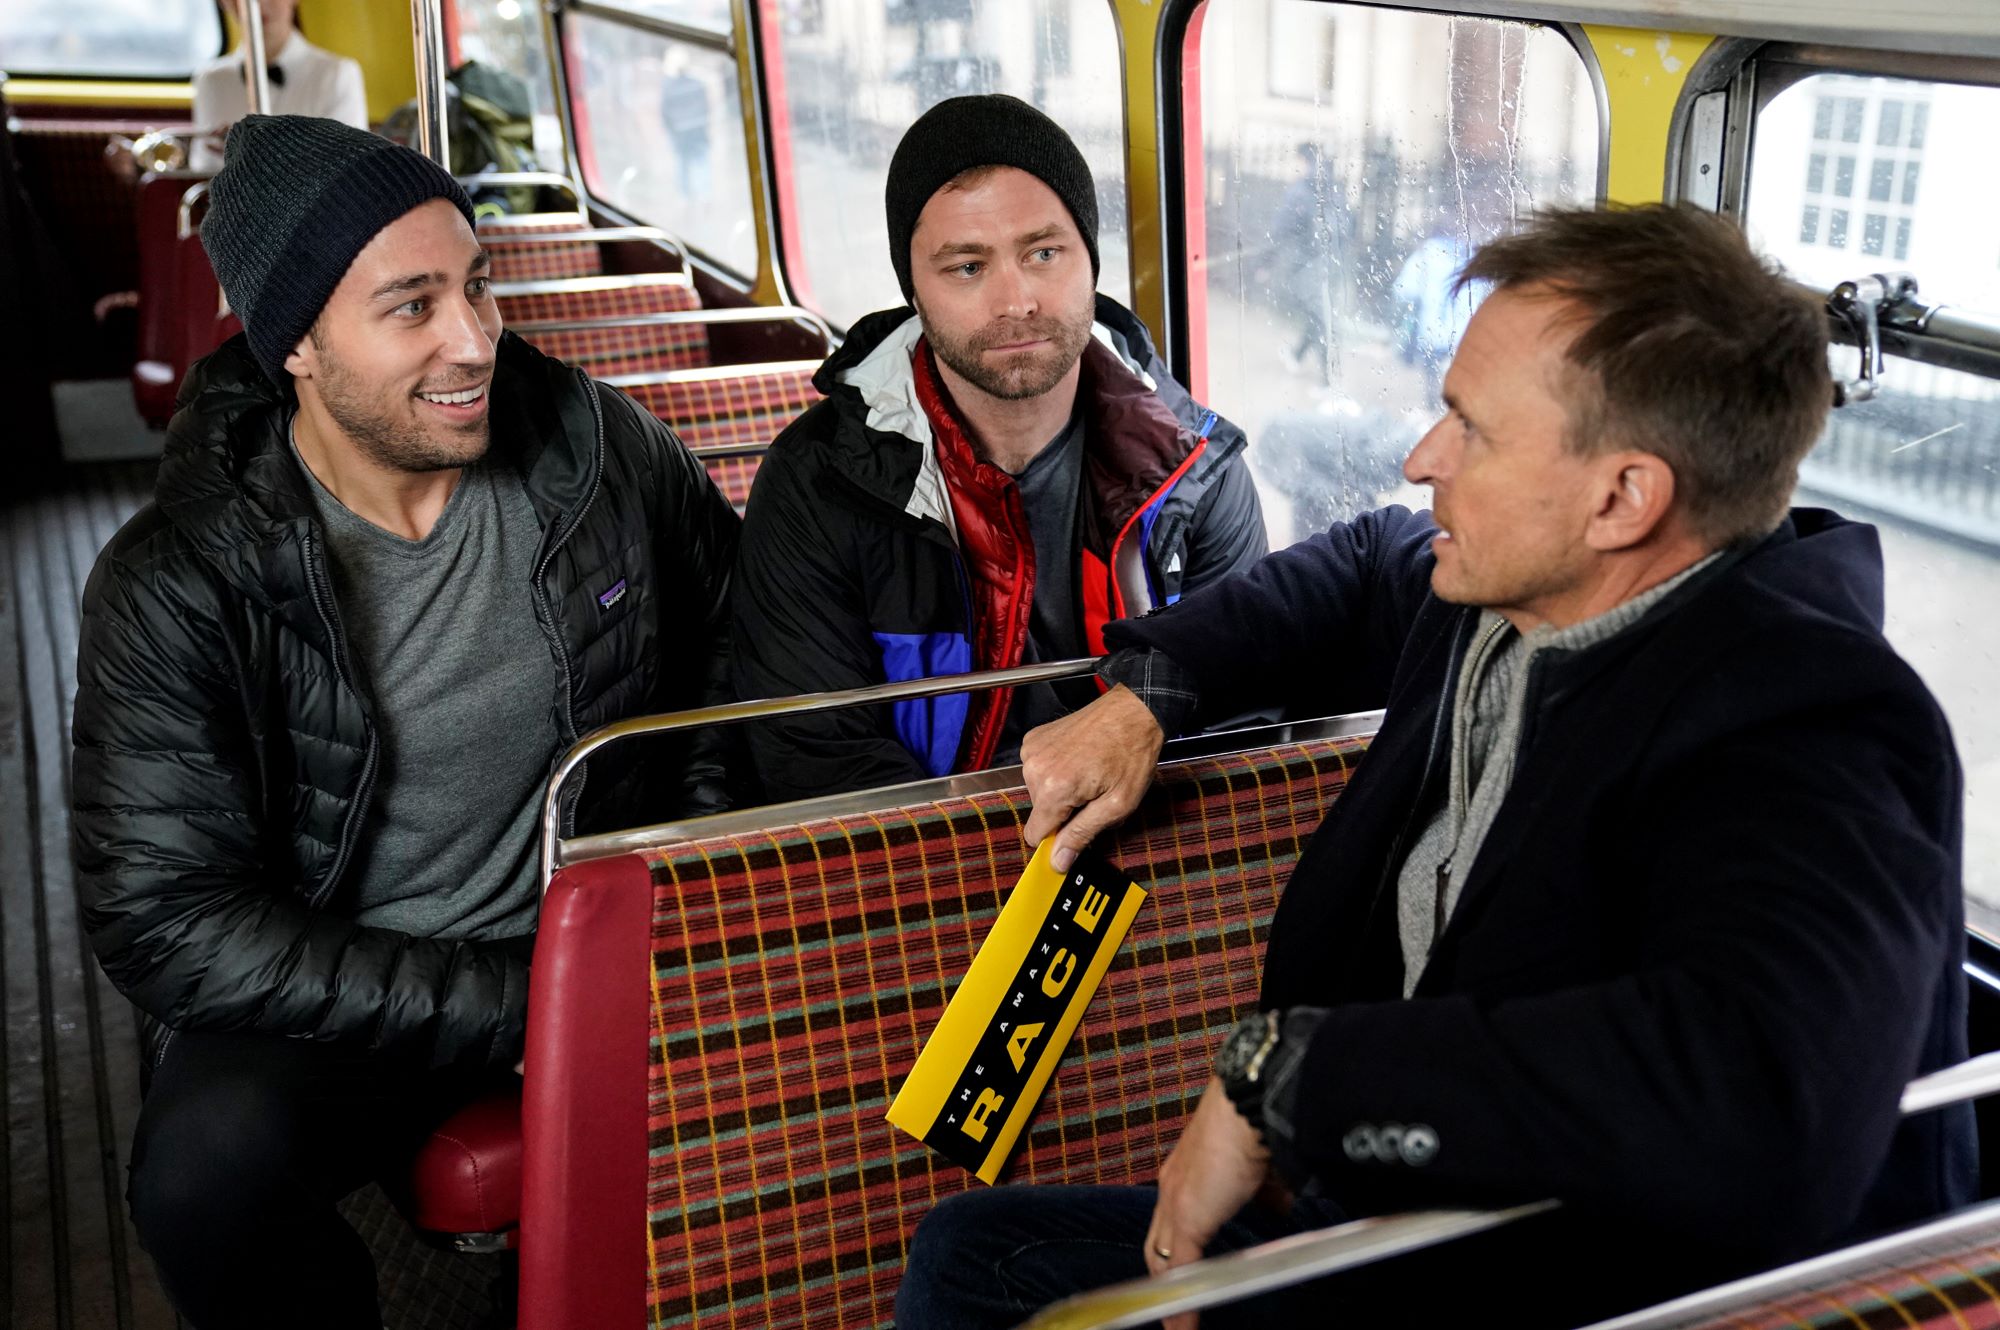 'The Amazing Race' Season 33 stars Ryan Ferguson, Dusty Harris, and Phil Keoghan talk in a double-decker bus during a pit stop in London. Ferguson wears a black jacket over a gray shirt and black beanie. Harris wears a black, blue, and red jacket and a black beanie. Keoghan wears a black coat over a gray sweater.